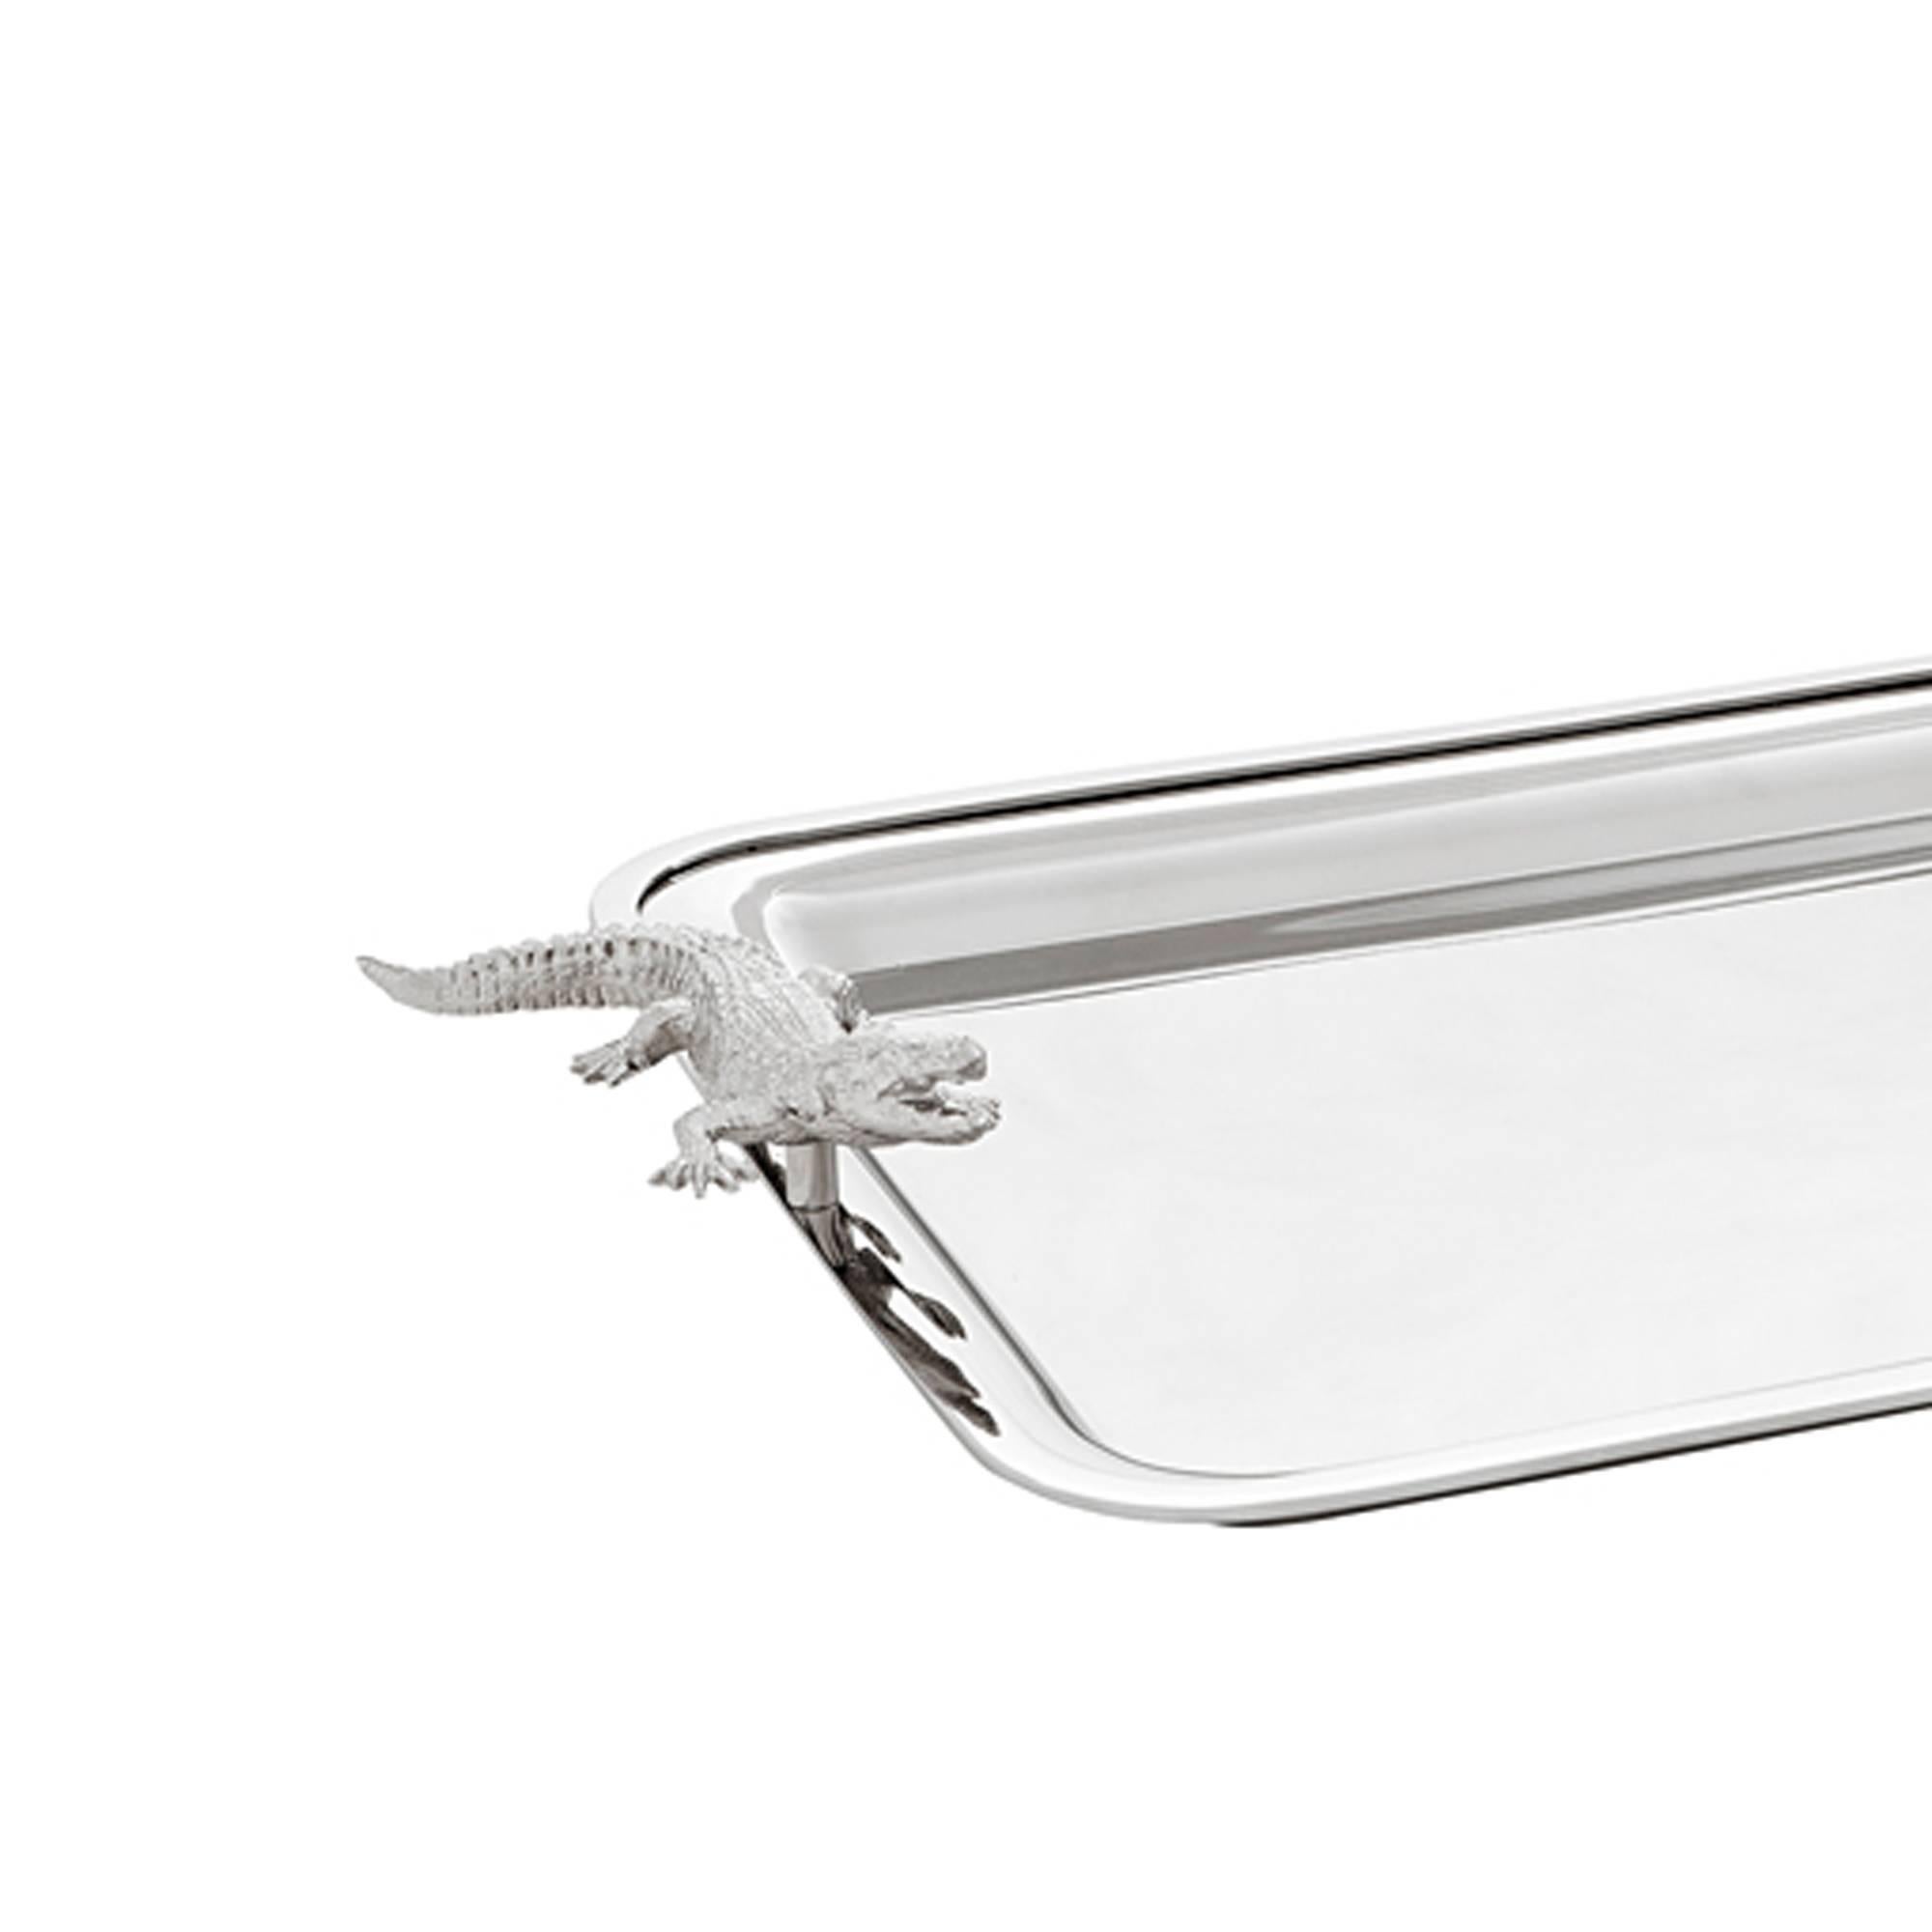 Tray Cayman in polished stainless steel
and nickel finish.
 